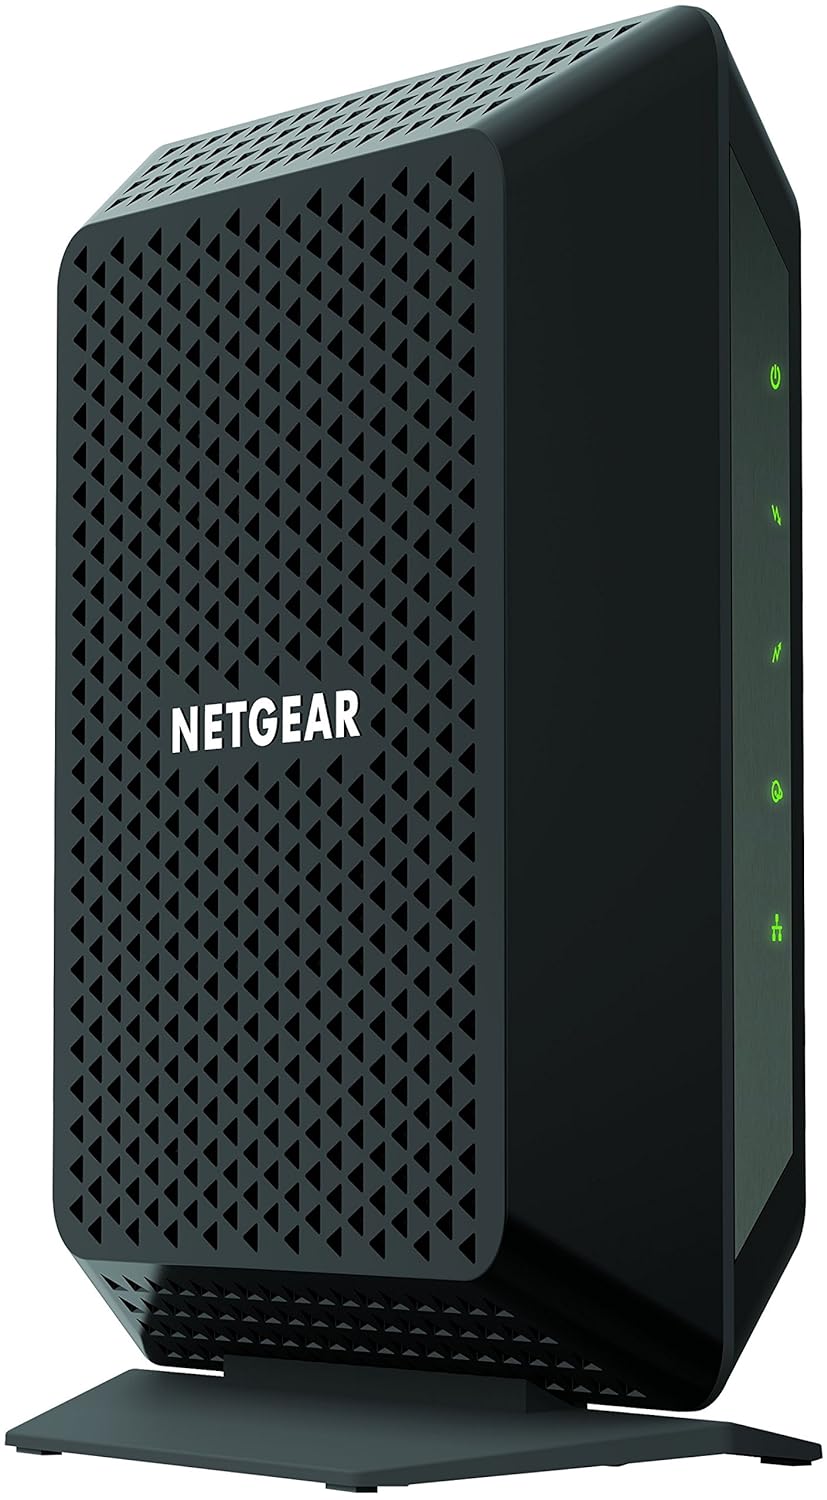 NETGEAR CM700, 32x8, DOCSIS 3.0 Cable Modem, Max Download Speeds of 1.4Gbps, Certified for XFINITY by Comcast, Time Warner Cable, Charter (CM700-1AZNAS)